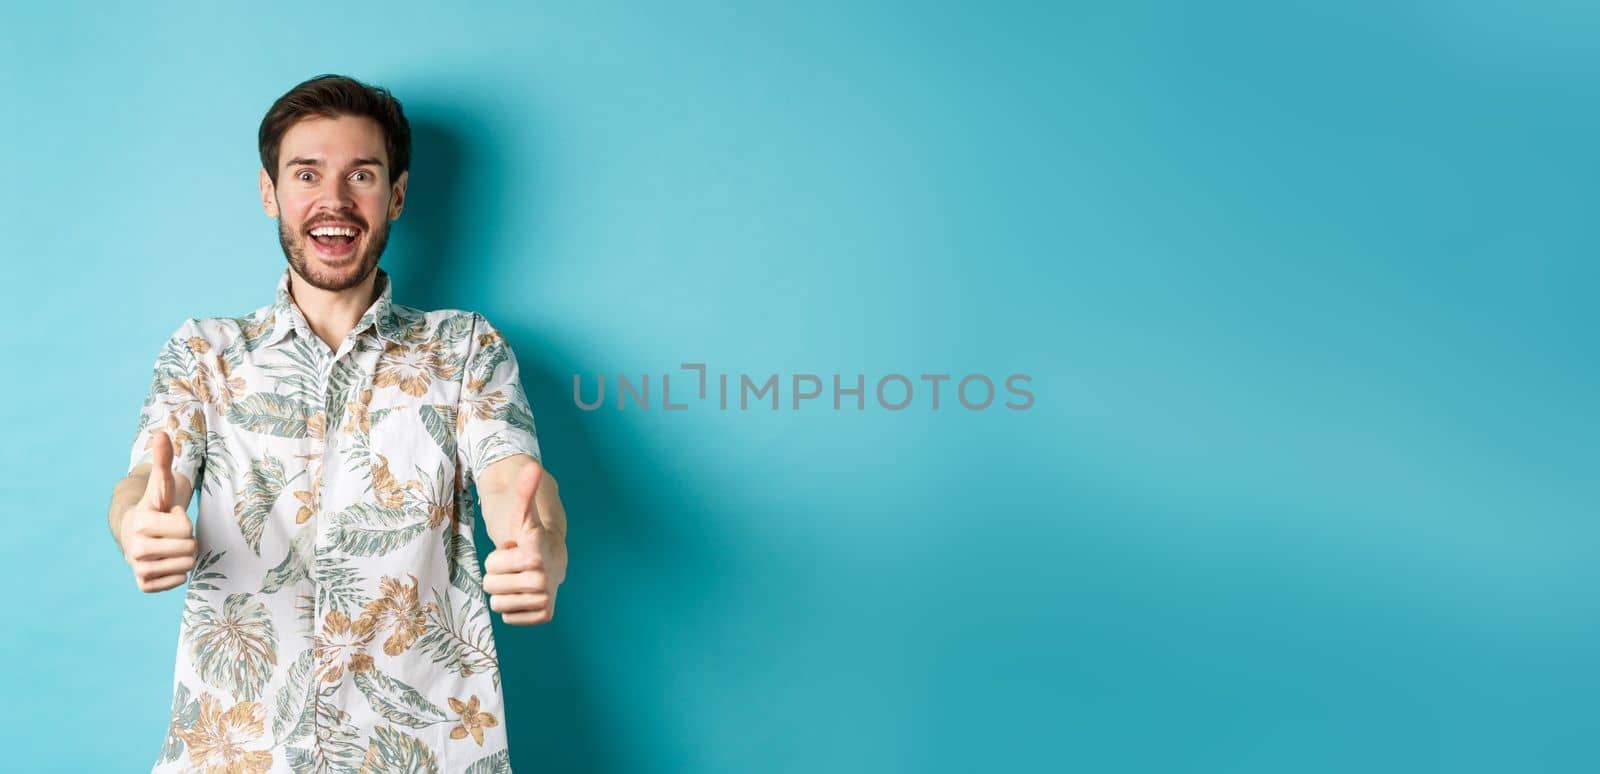 Excited smiling guy in hawaiian shirt show thumbs up, looking amazed, checking out cool promo, standing on blue background.